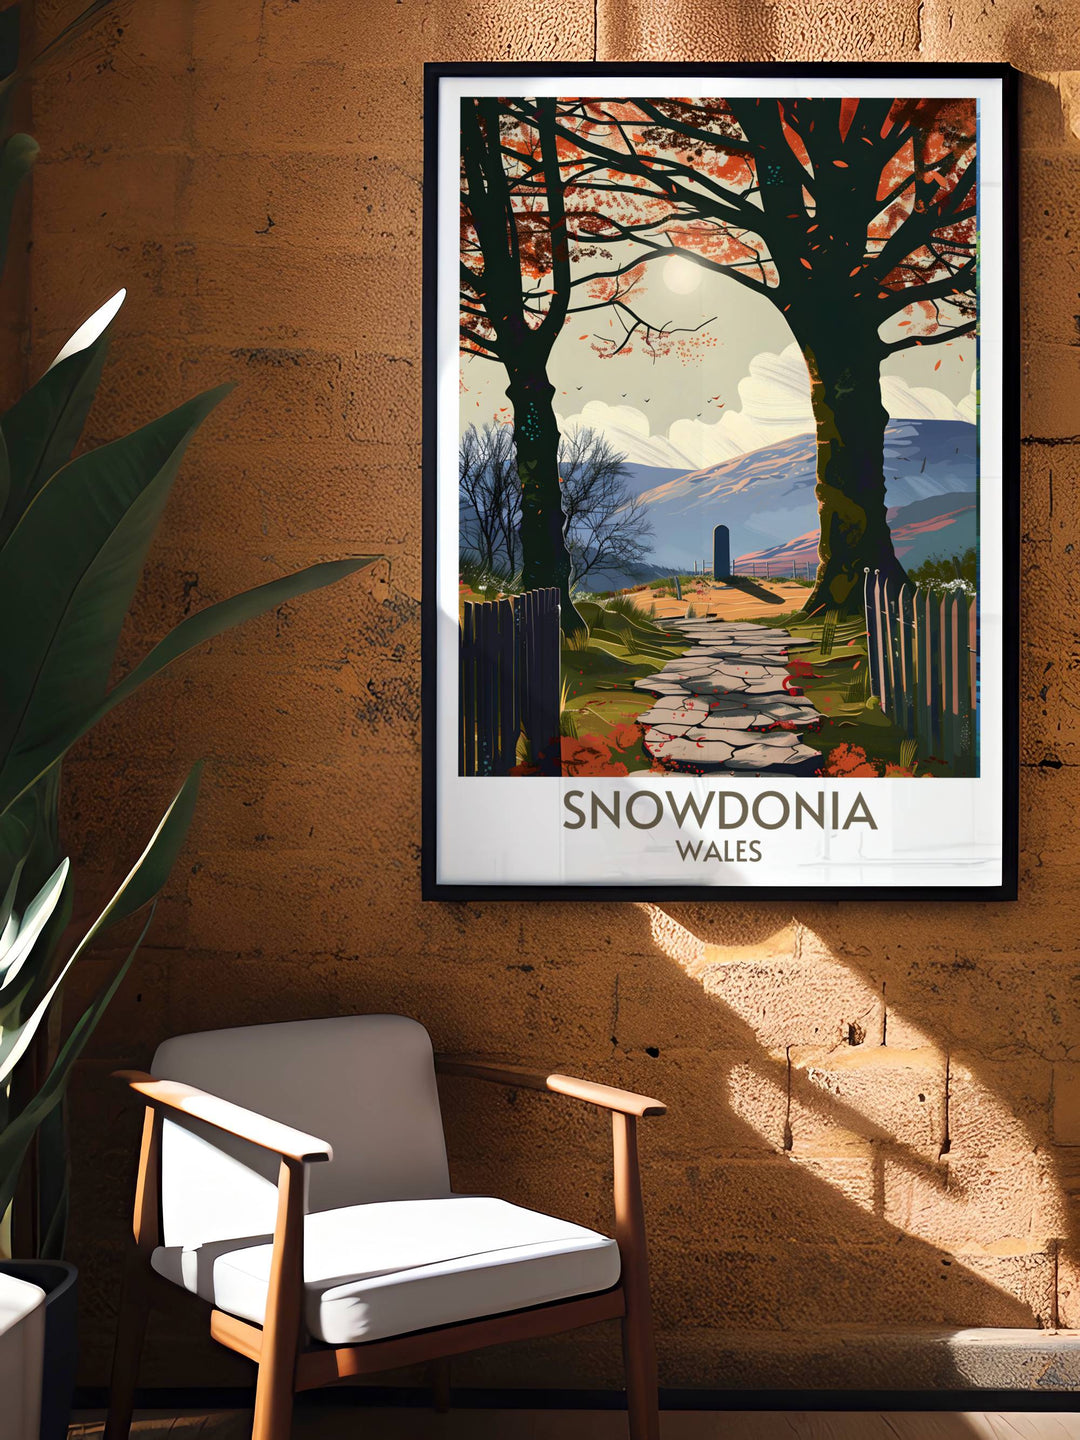 Snowdonia print of Galerts Grave, blending the legend with stunning natural scenery. Enhance your wall art collection with this captivating depiction of Wales national park.